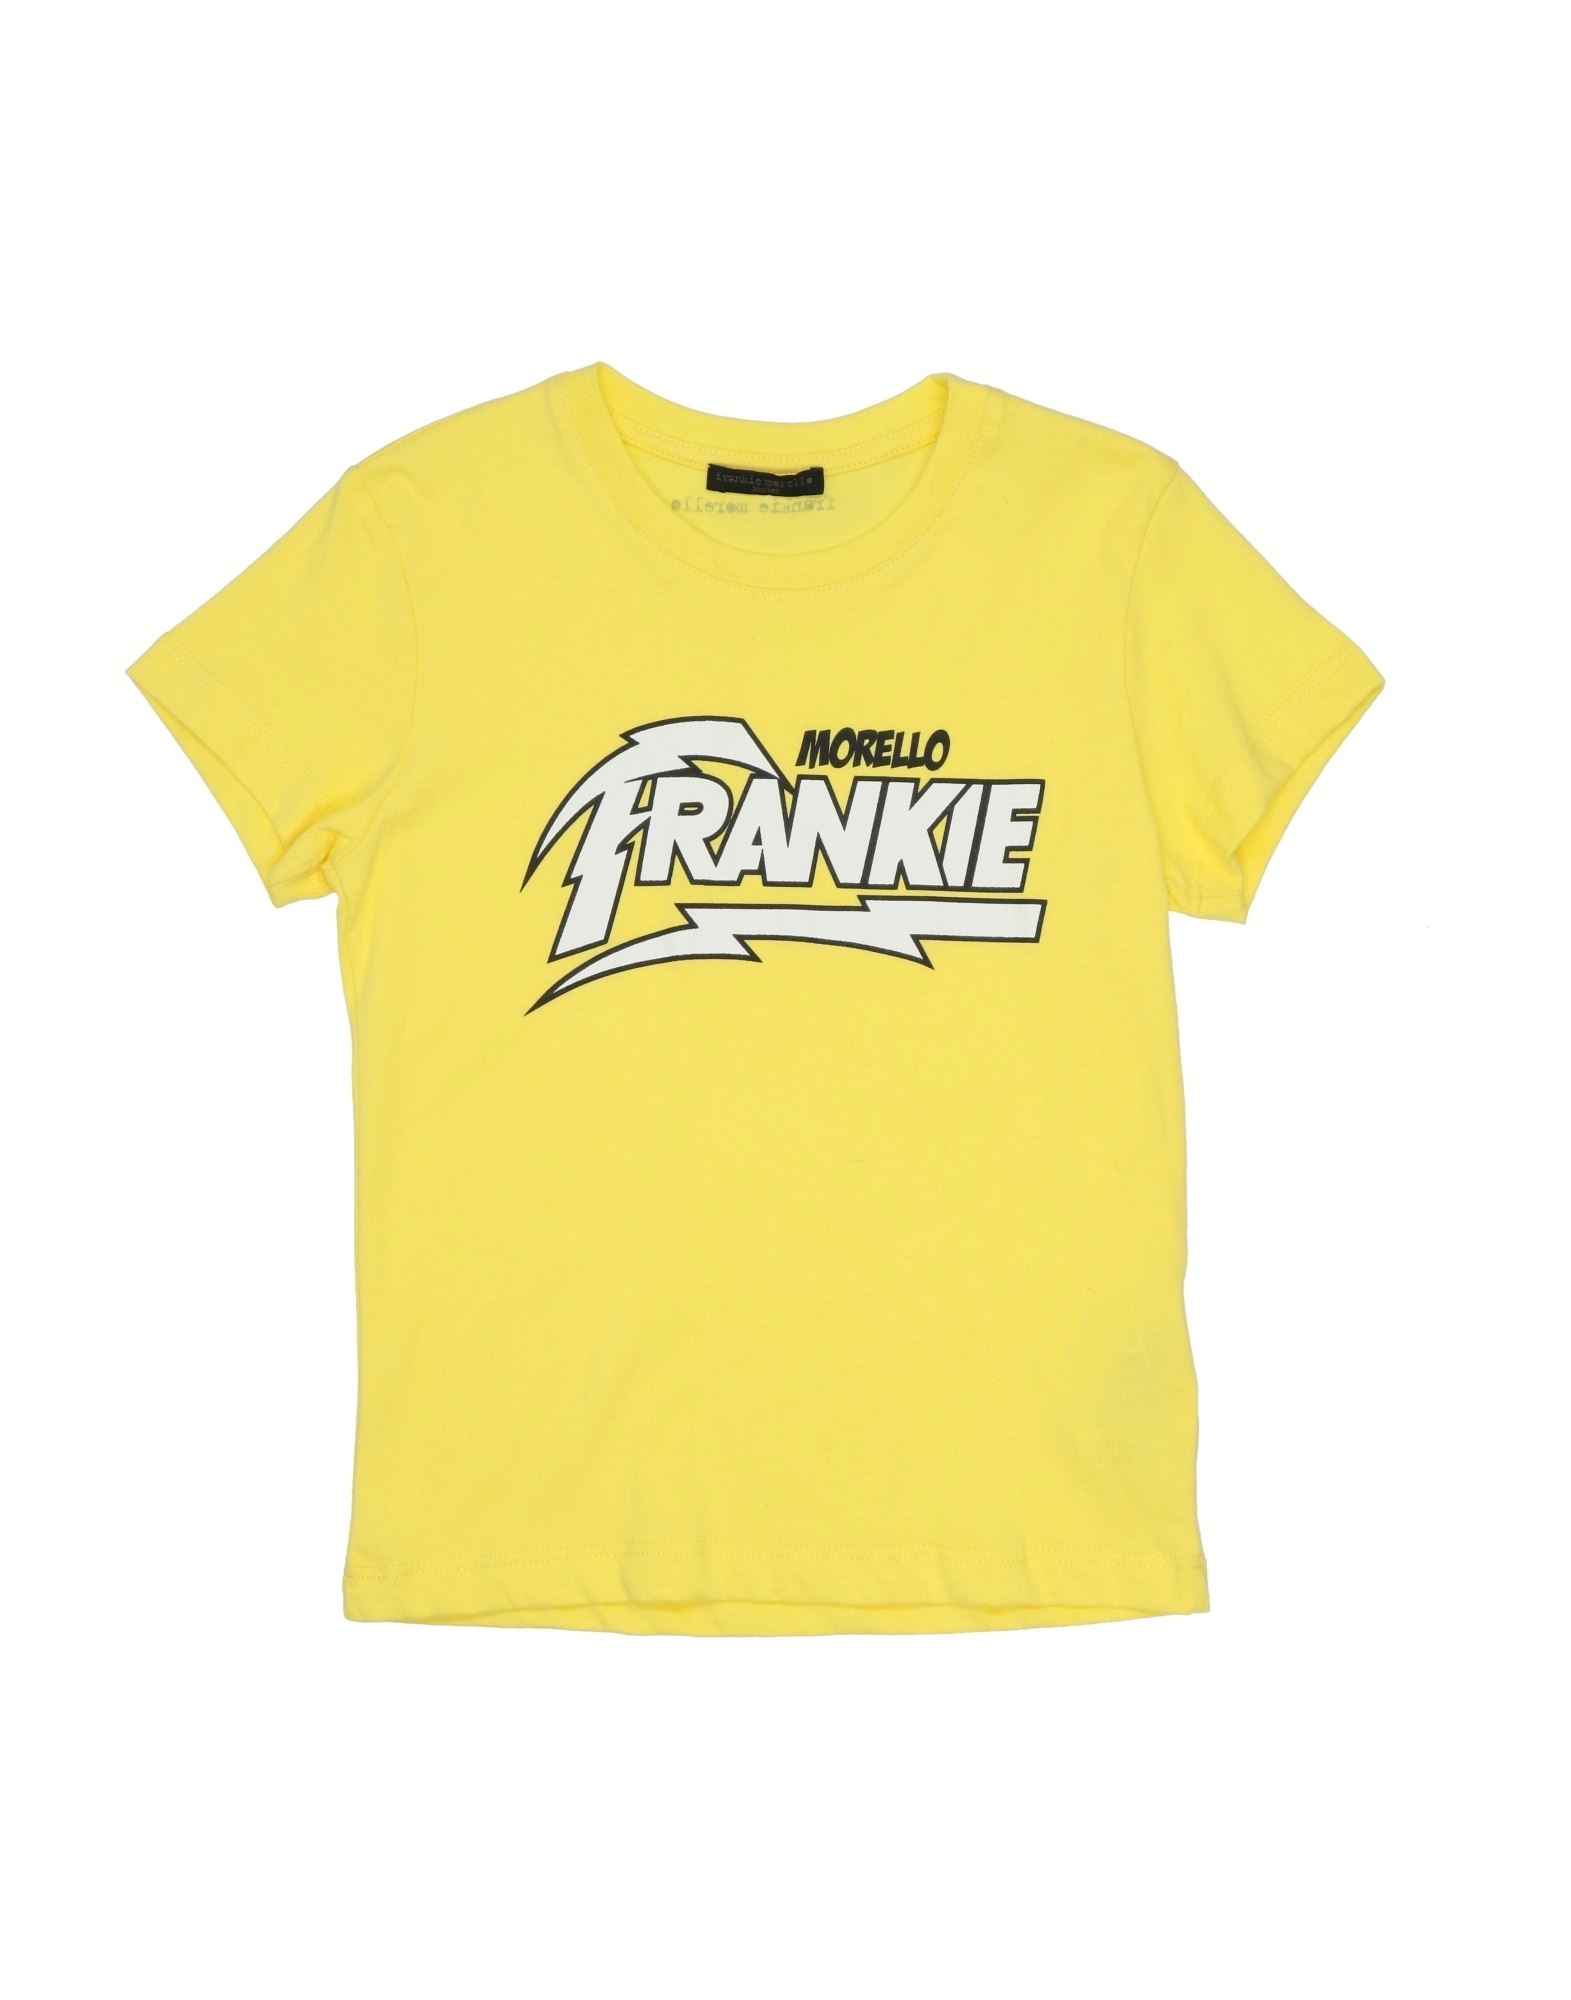 Frankie Morello Kids'  T-shirts In Yellow